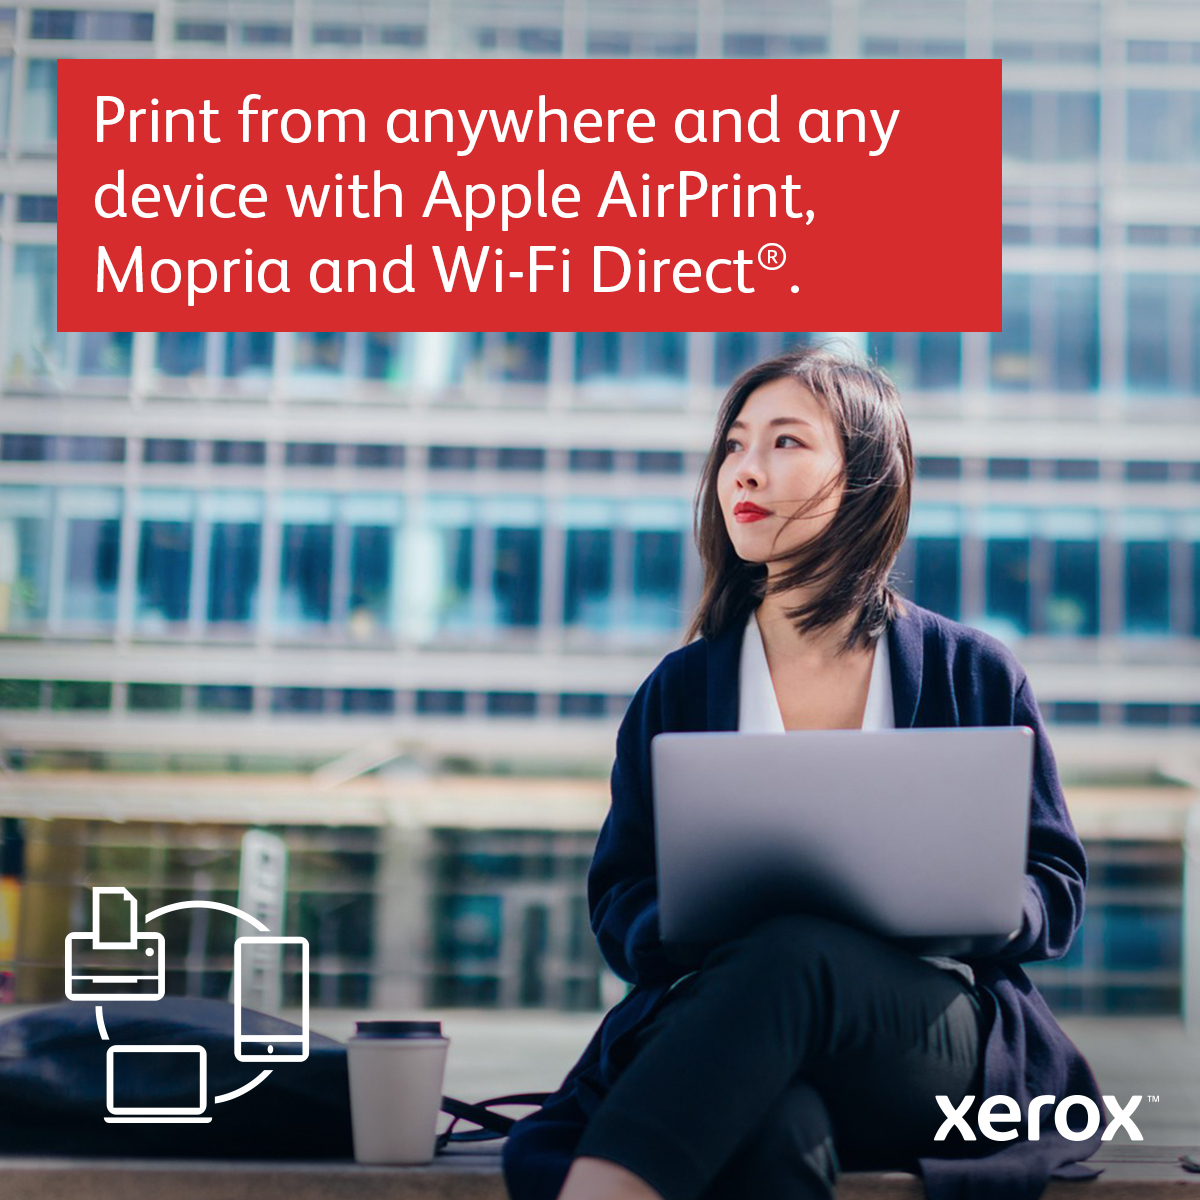 Xerox B305 Multifunction Printer, Print/Scan/Copy, Black and White Laser, Wireless, All In One